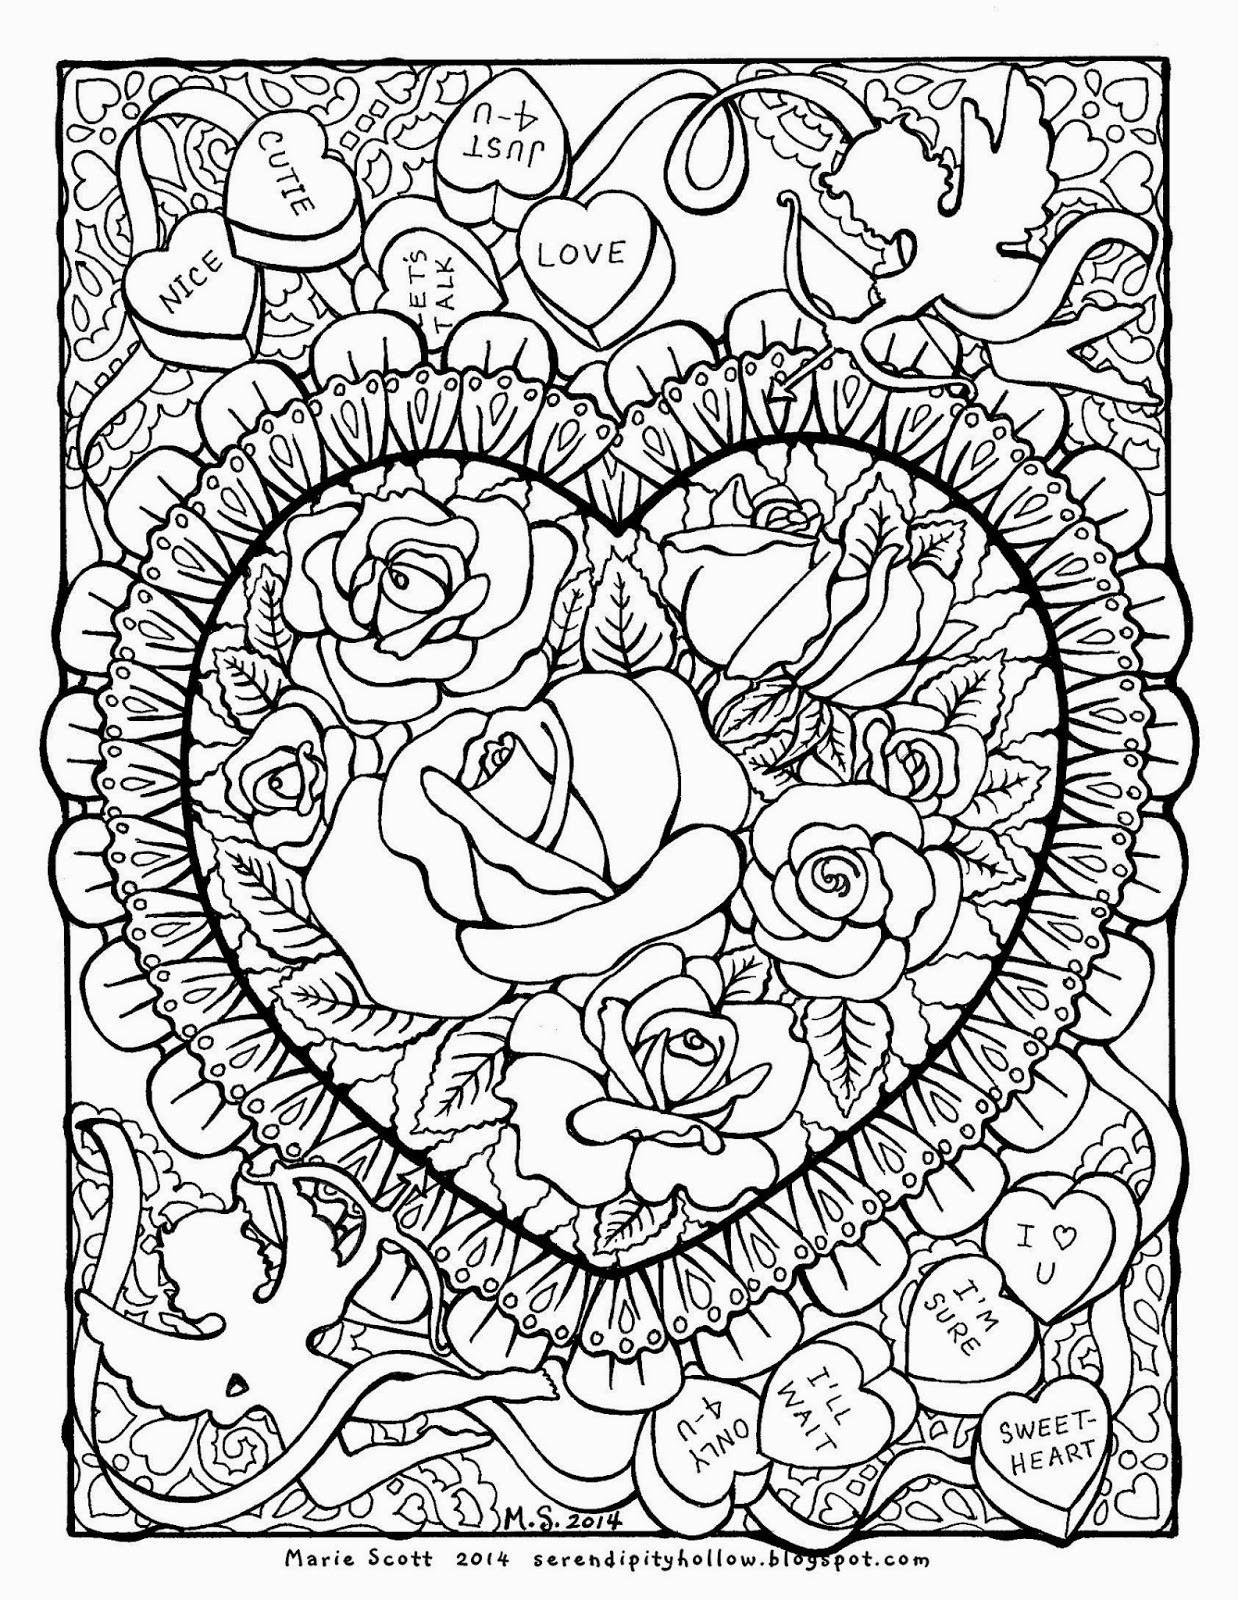 February Coloring Pages Printable
 Serendipity Hollow Coloring book Page February